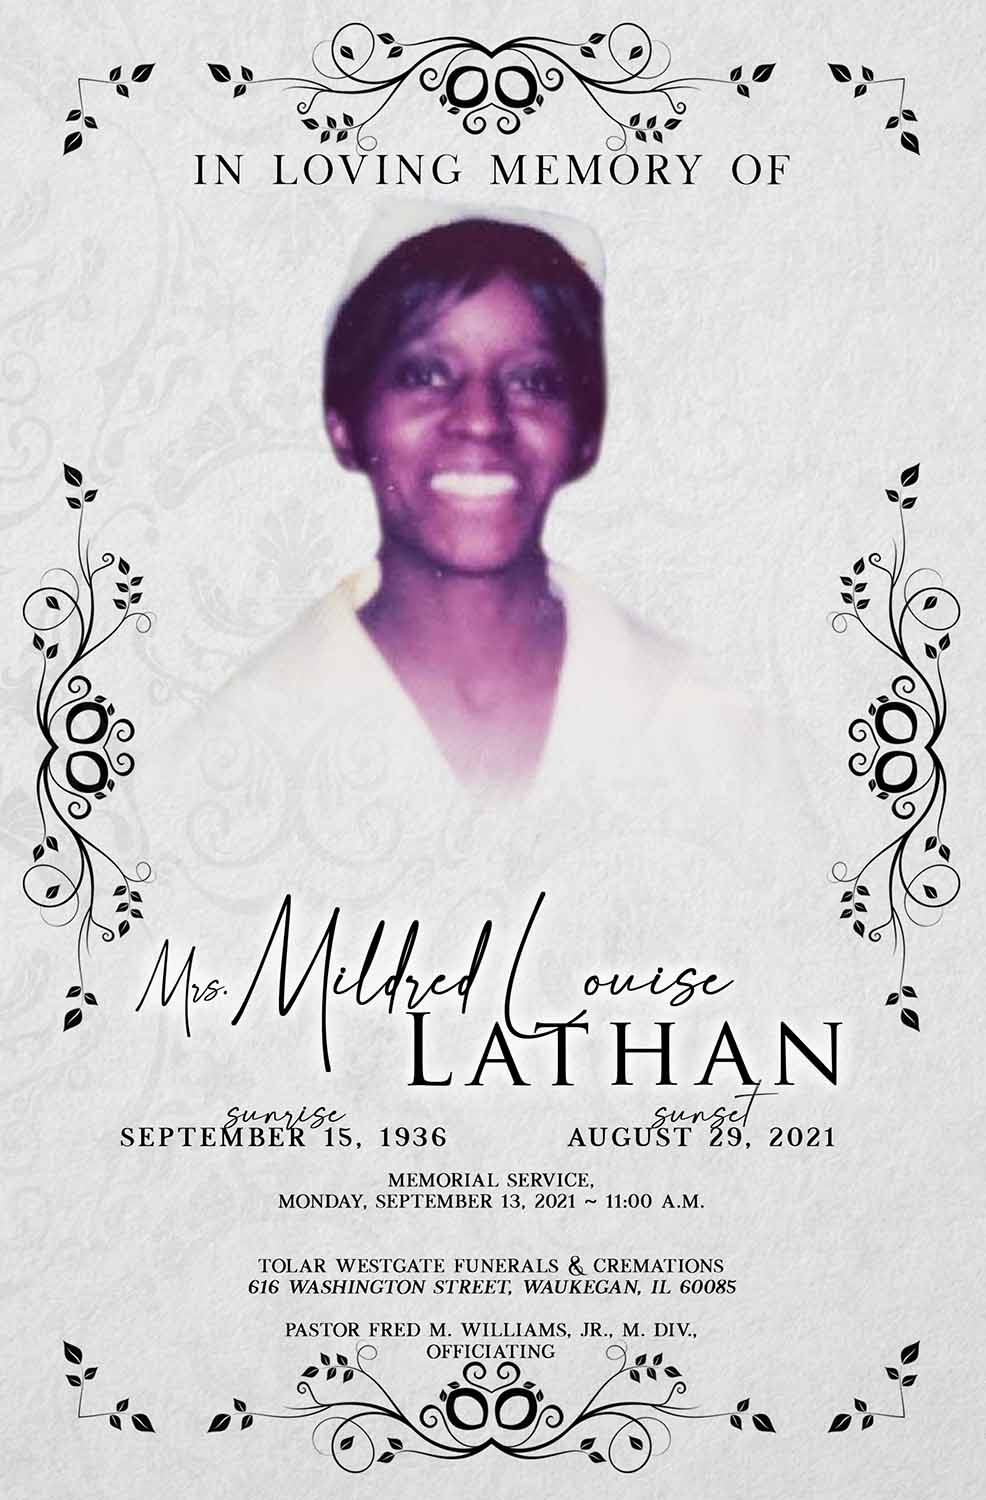 Mildred Louise Lathan 1936-2021